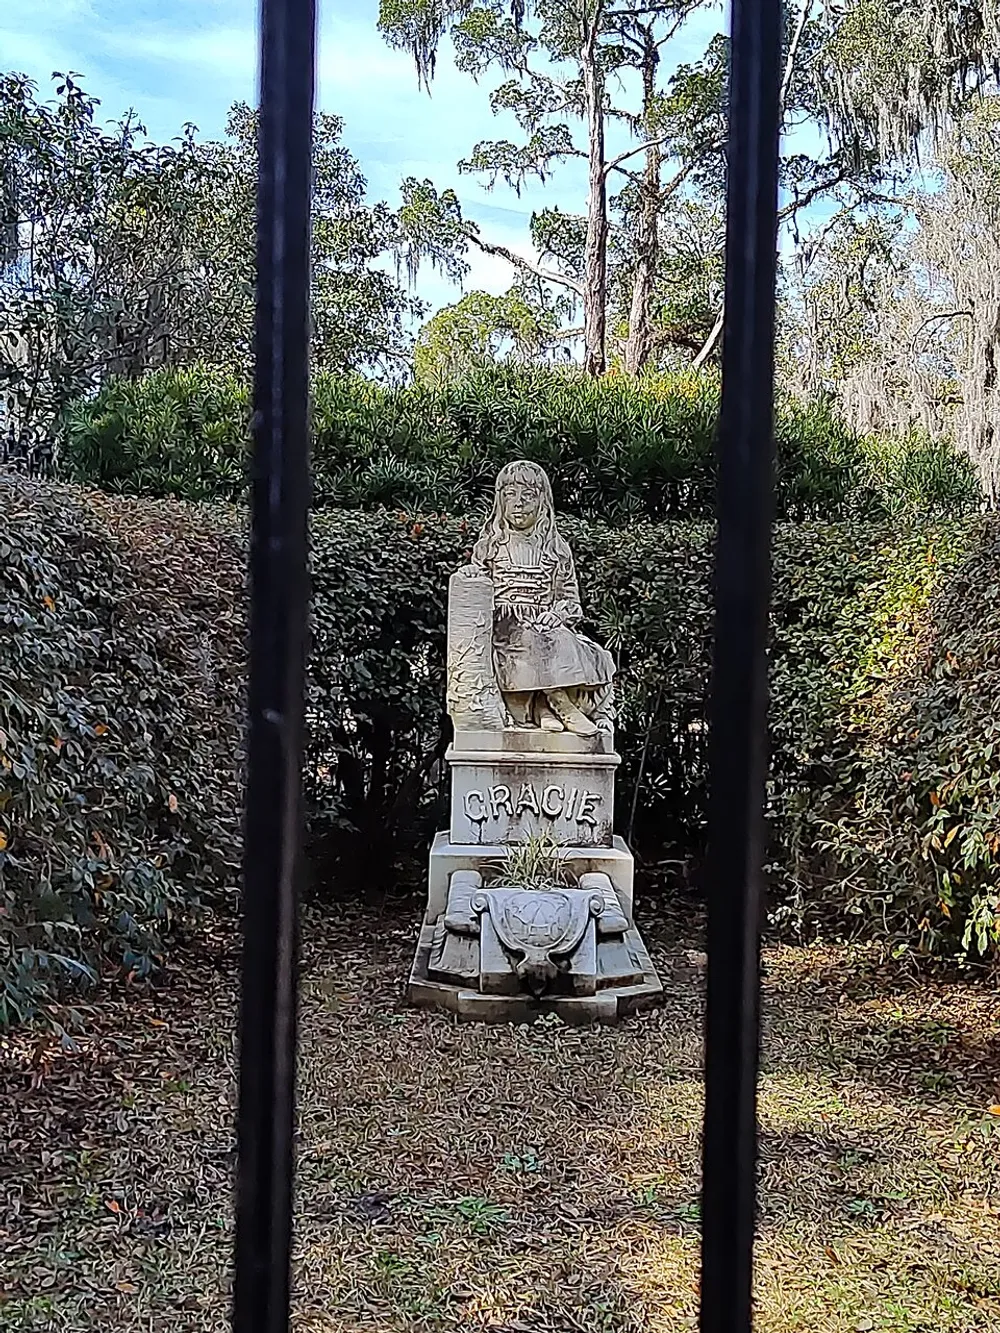 The image shows a sculpture of a young girl sitting on a bench labeled Gracie framed by vertical bars in the foreground and surrounded by trees and shrubbery